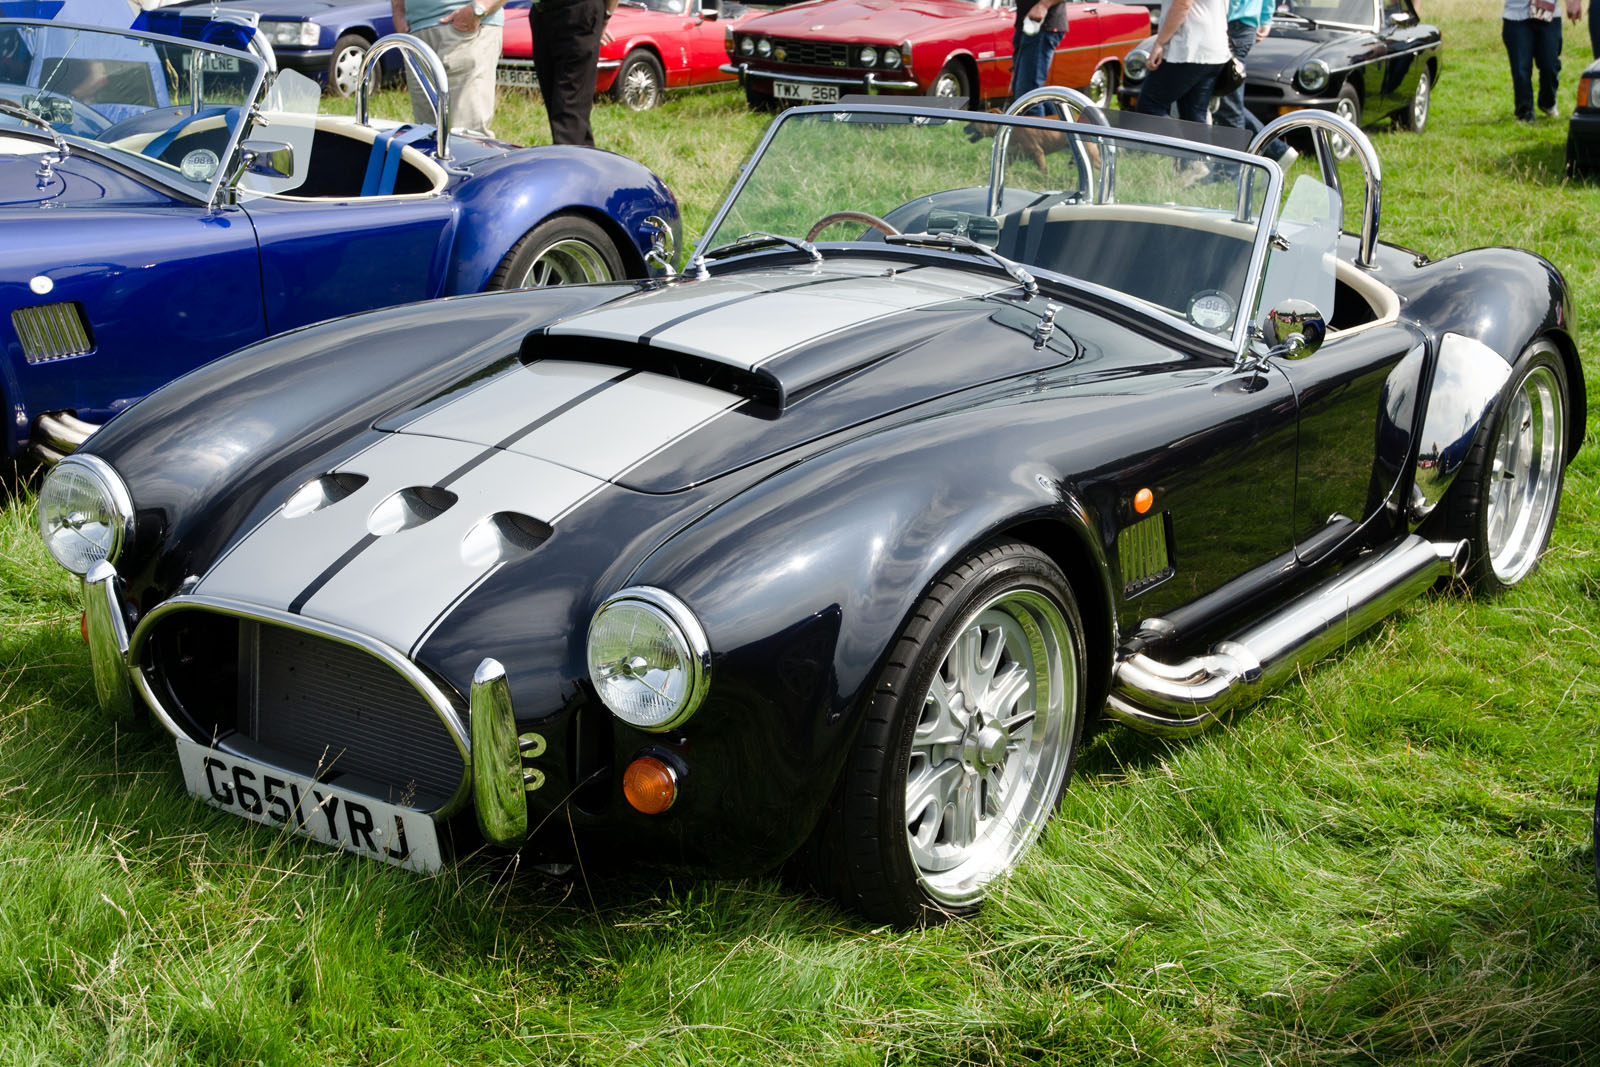 a black and gray sports car is on display